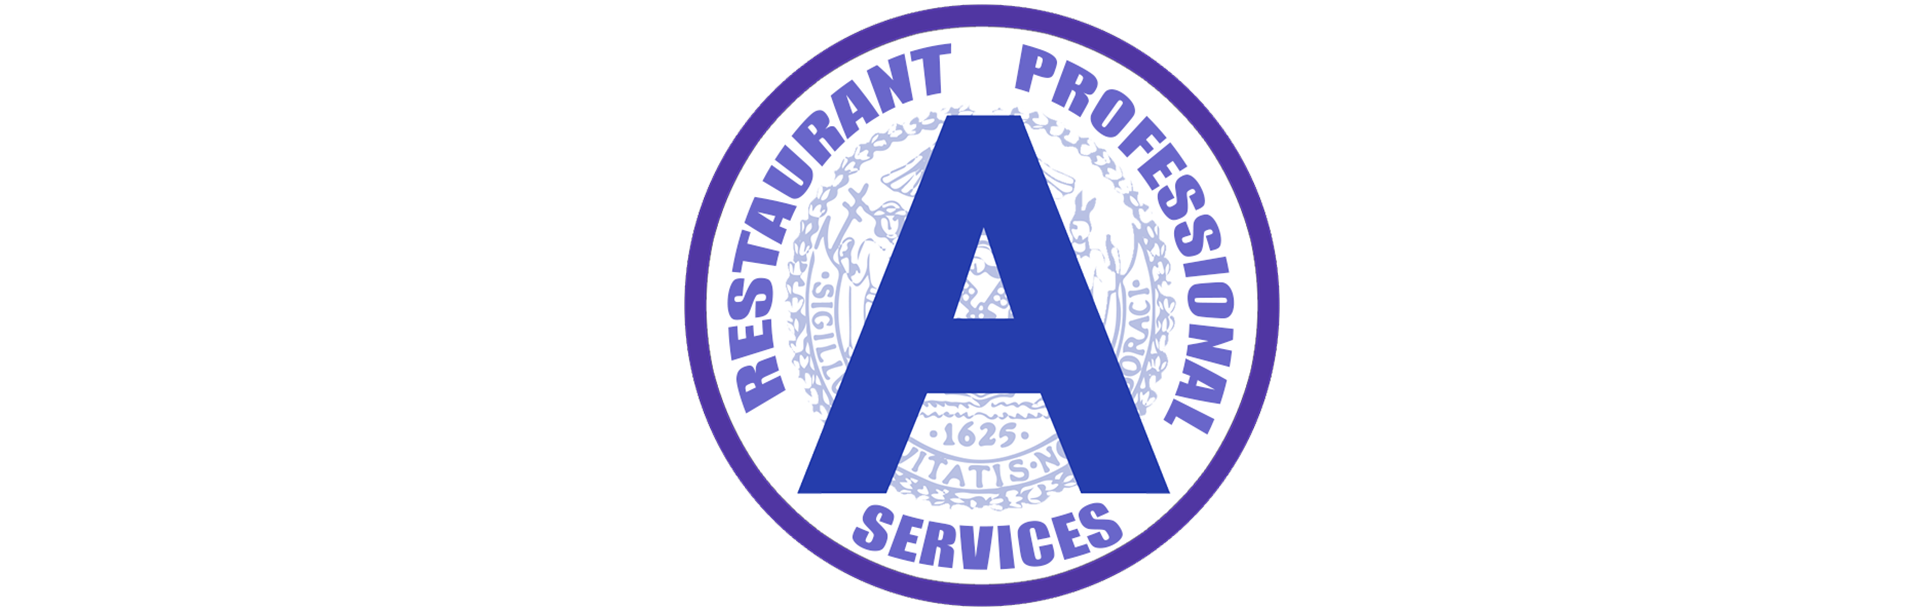 Restaurant Professional Services, LLC, Health Department Inspection Violation Removal, Mock Inspections, Health Department Court Representation, Restaurant Profit Programs, Staff Training, & Food Cost Programs in the Manhattan (NYC), Queens, Brooklyn, Staten Island, Bronx, Long Island, Westchester, Connecticut, & New Jersey Area | PHONE: Mark Manganiello 516-557-5447, PHONE: Patrick Shoureas 516-946-6747 or email RestaurantProfessionalServices@gmail.com - Image